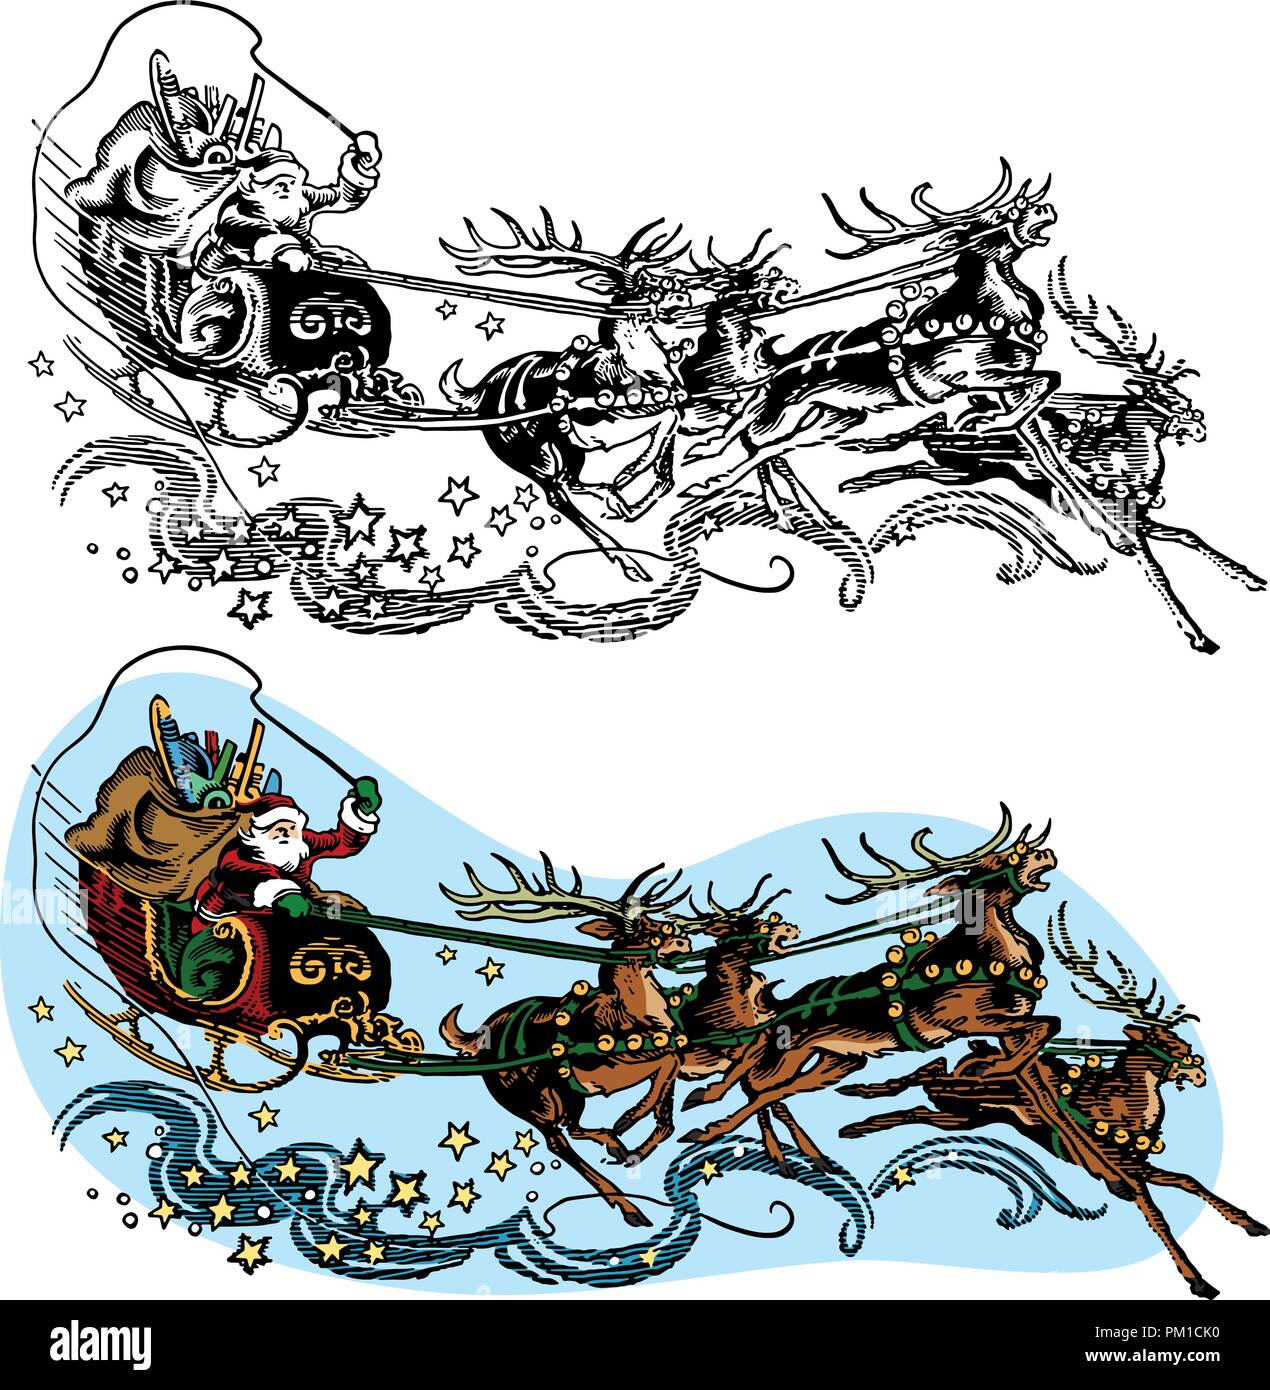 Santa Claus flies in his sleigh pulled by his magic reindeer on Christmas Eve. Stock Vector